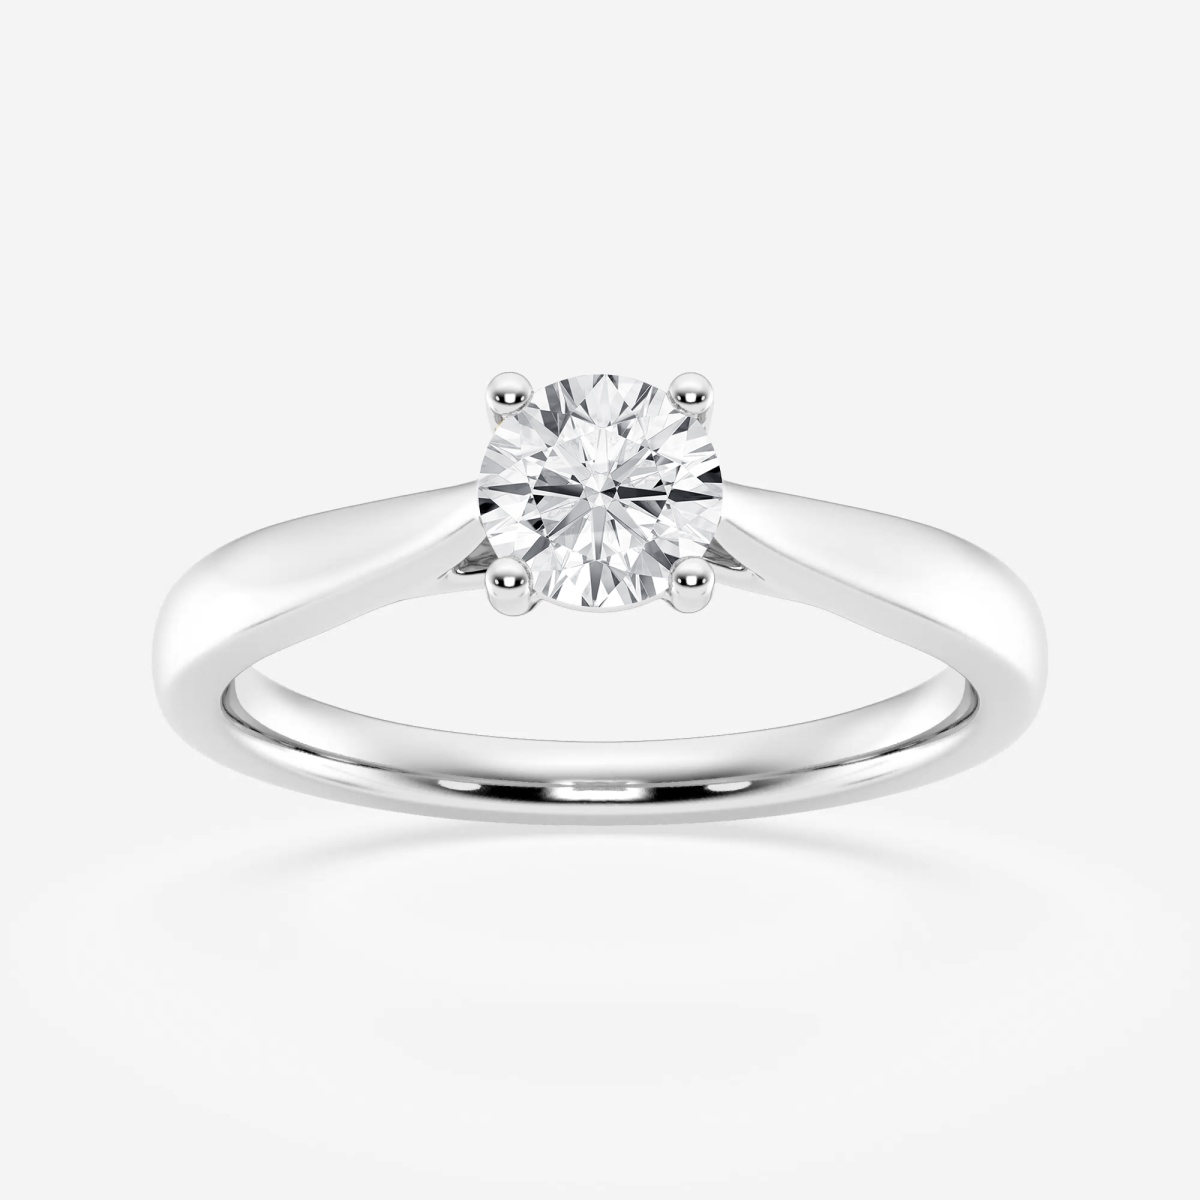 1/2 Carat Colorless Diamond Solitaire Engagement Ring in White Gold